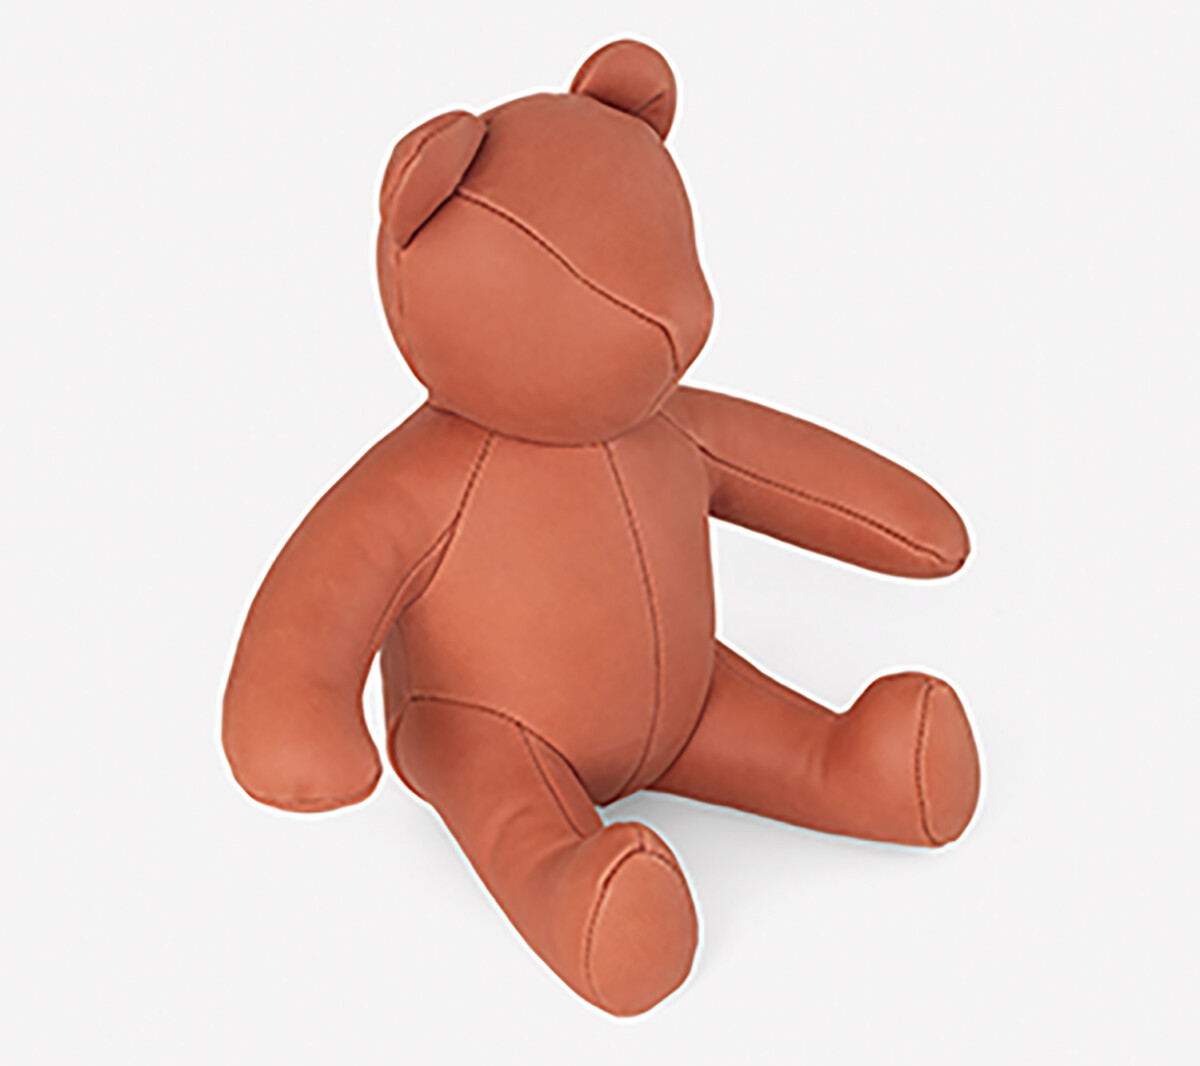 Colorful Home Decor and Accessories for 2021: color orange. Orange leather stuffed toy bear